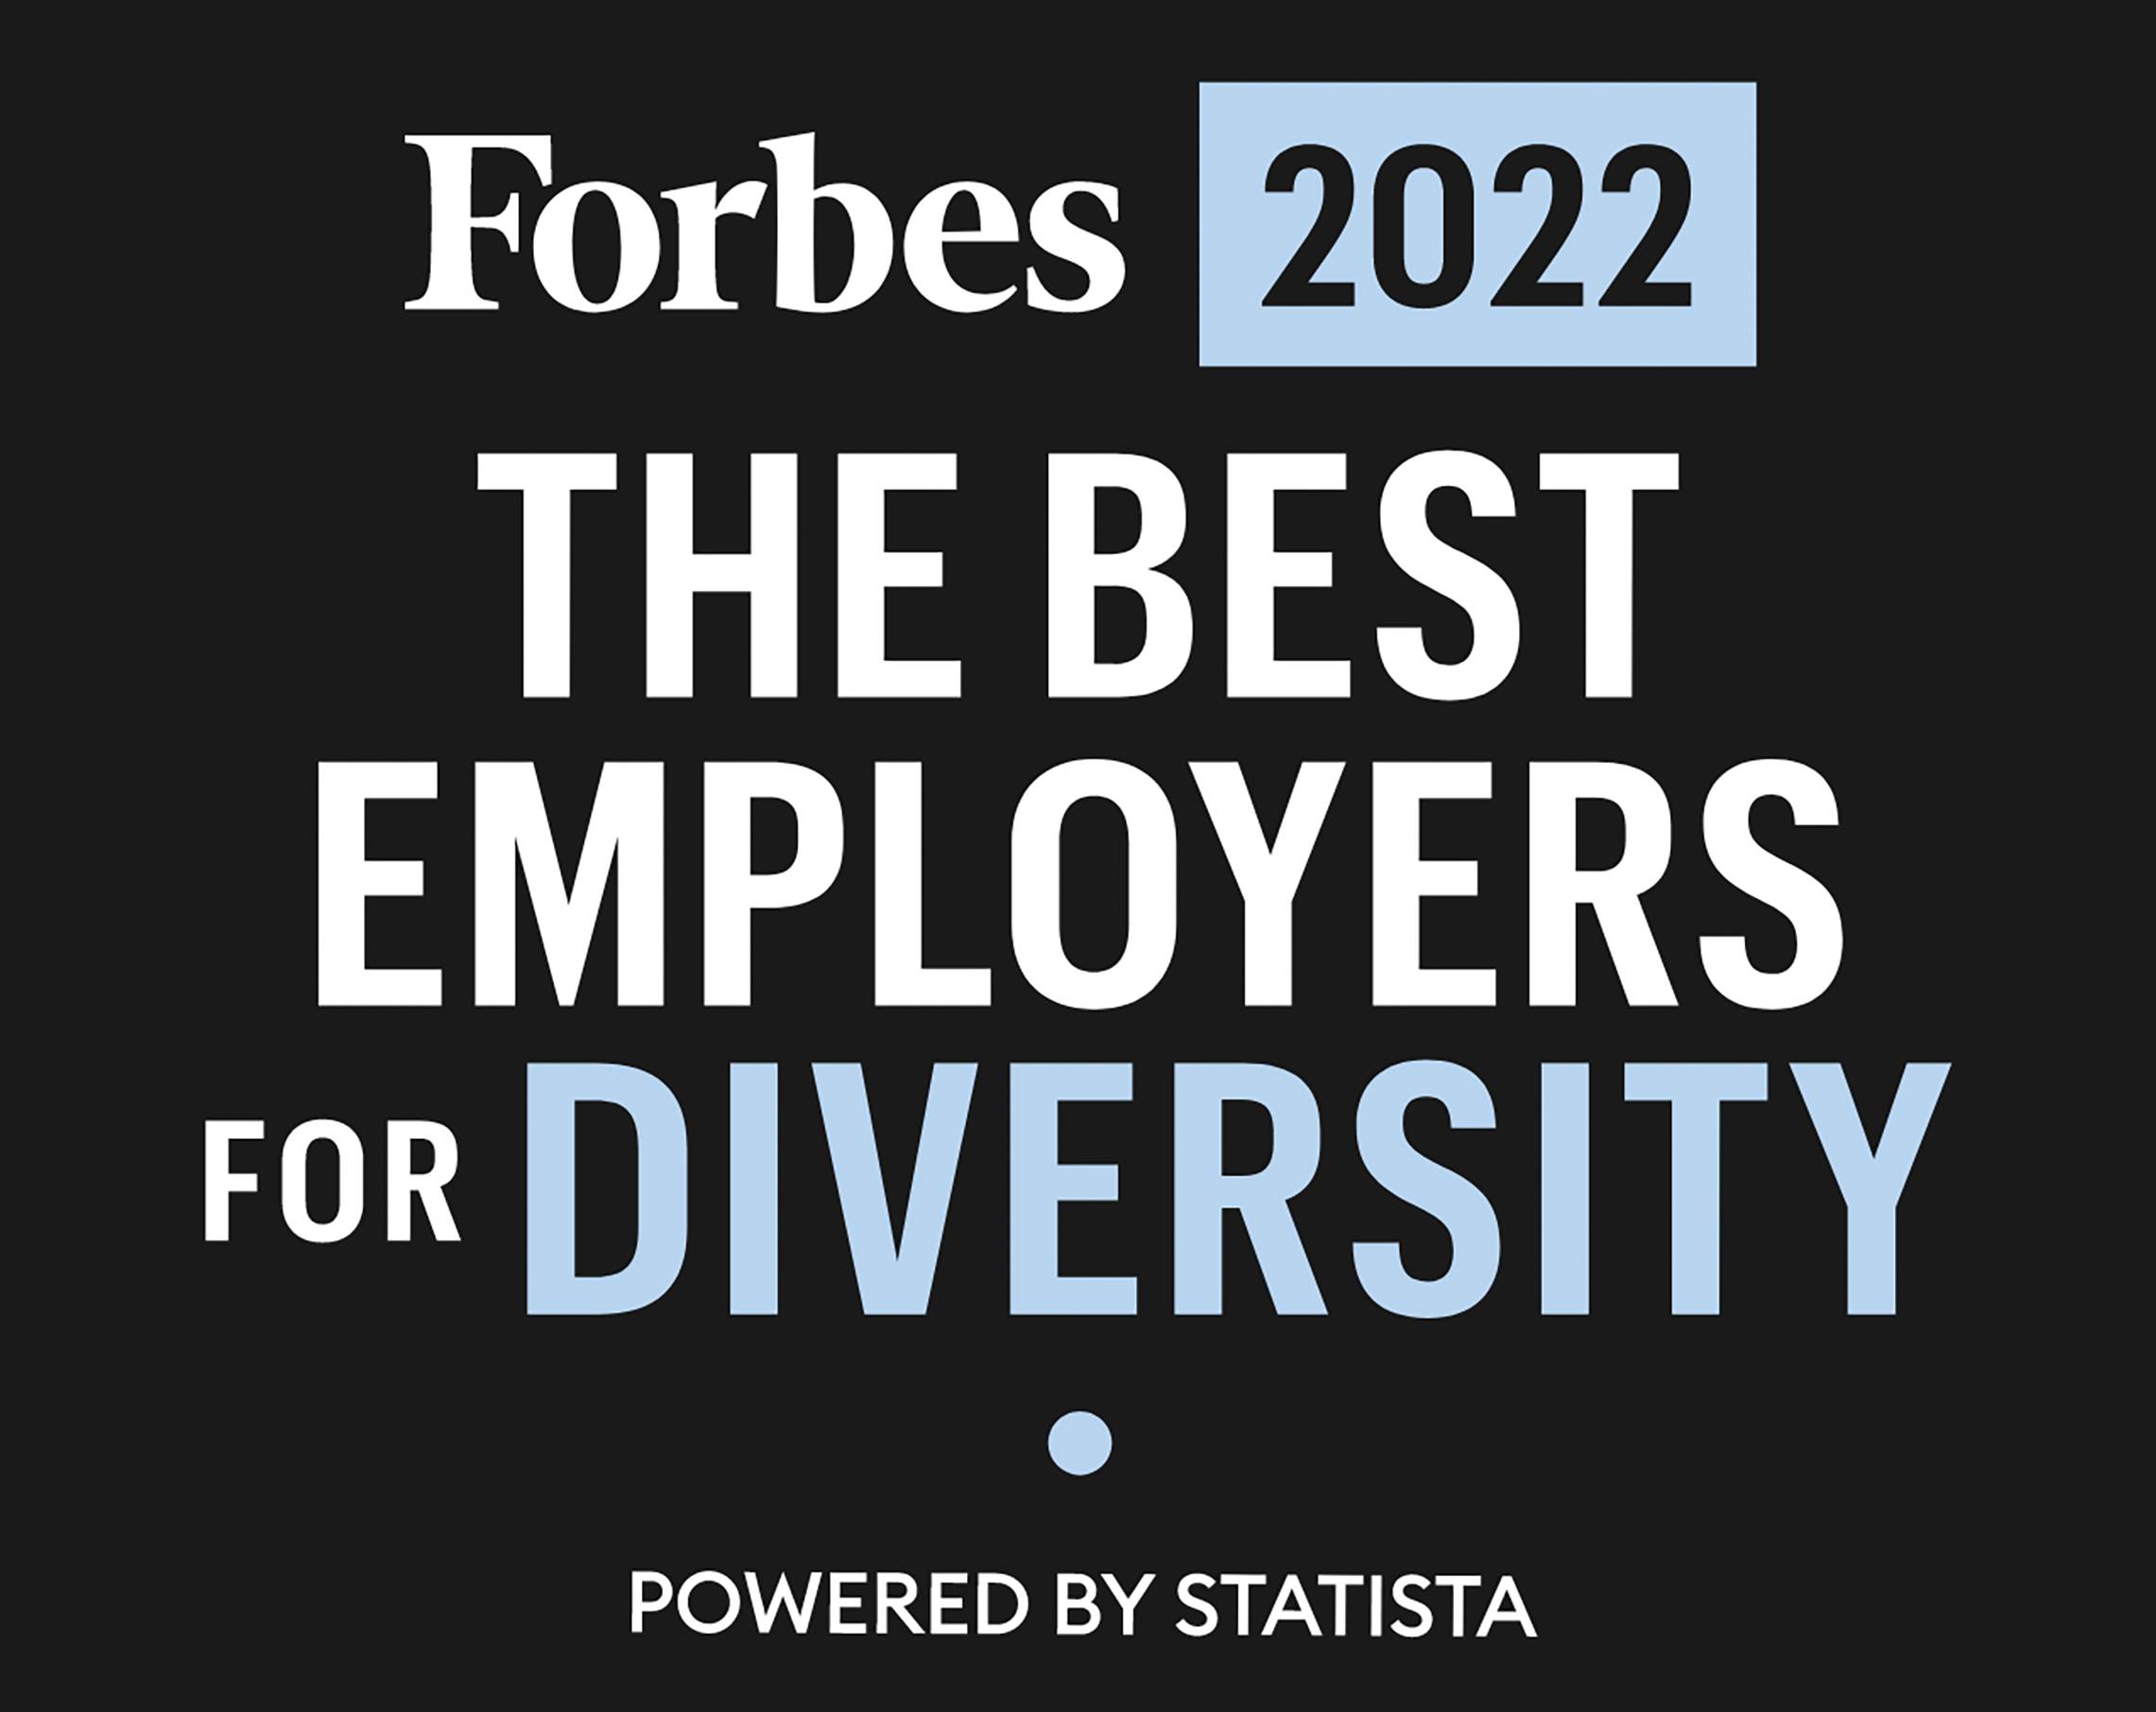 Forbes Best Employers for Diversity in 2022 